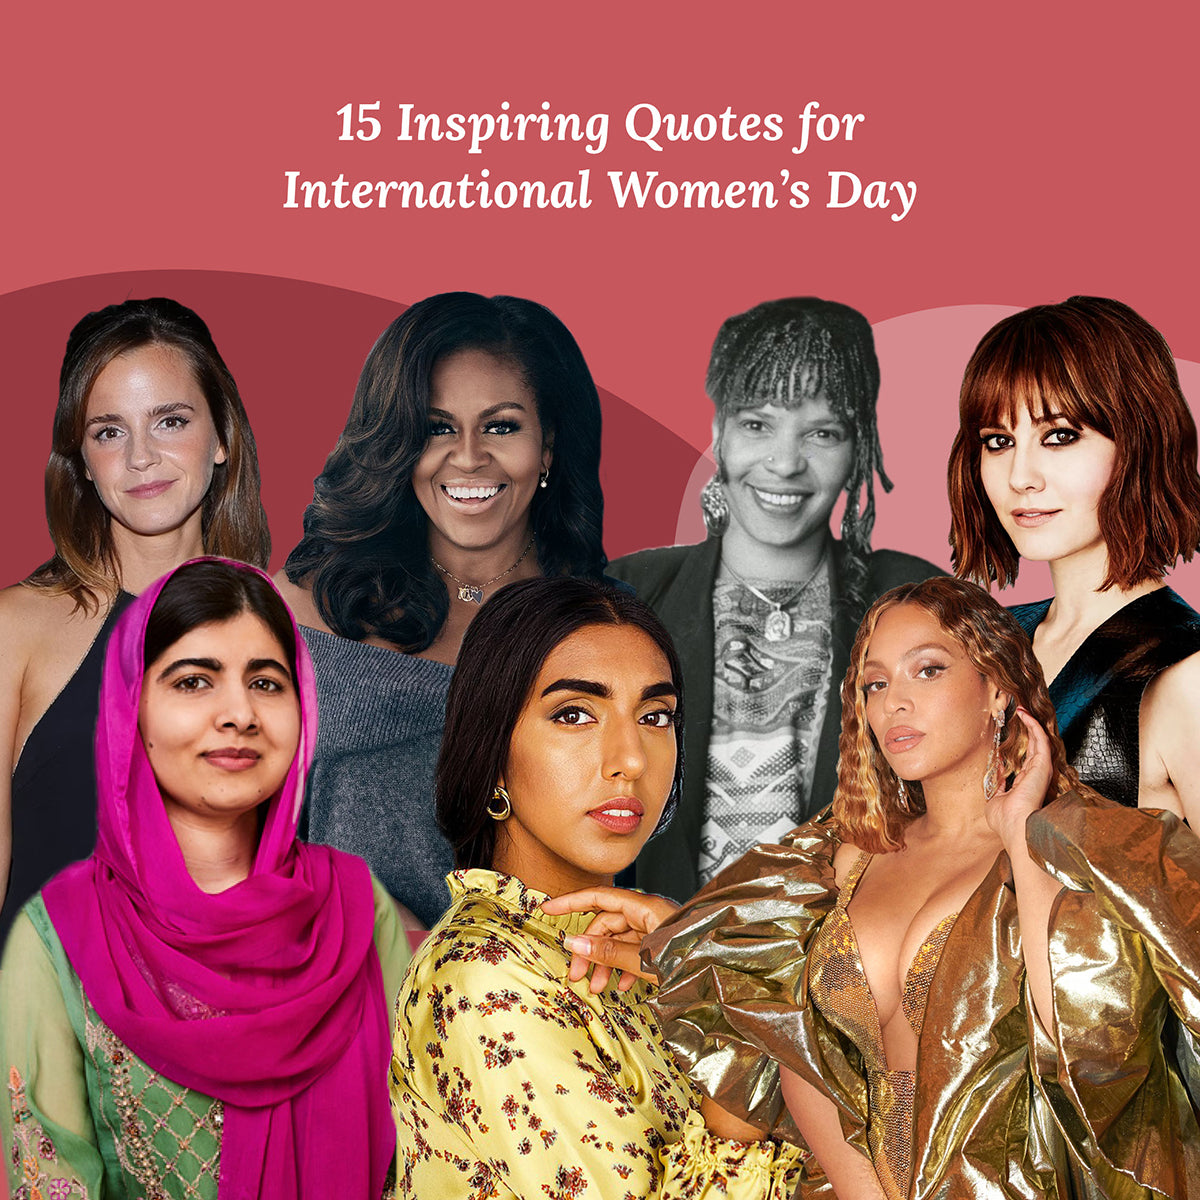 15 Inspiring Quotes from Influential Women